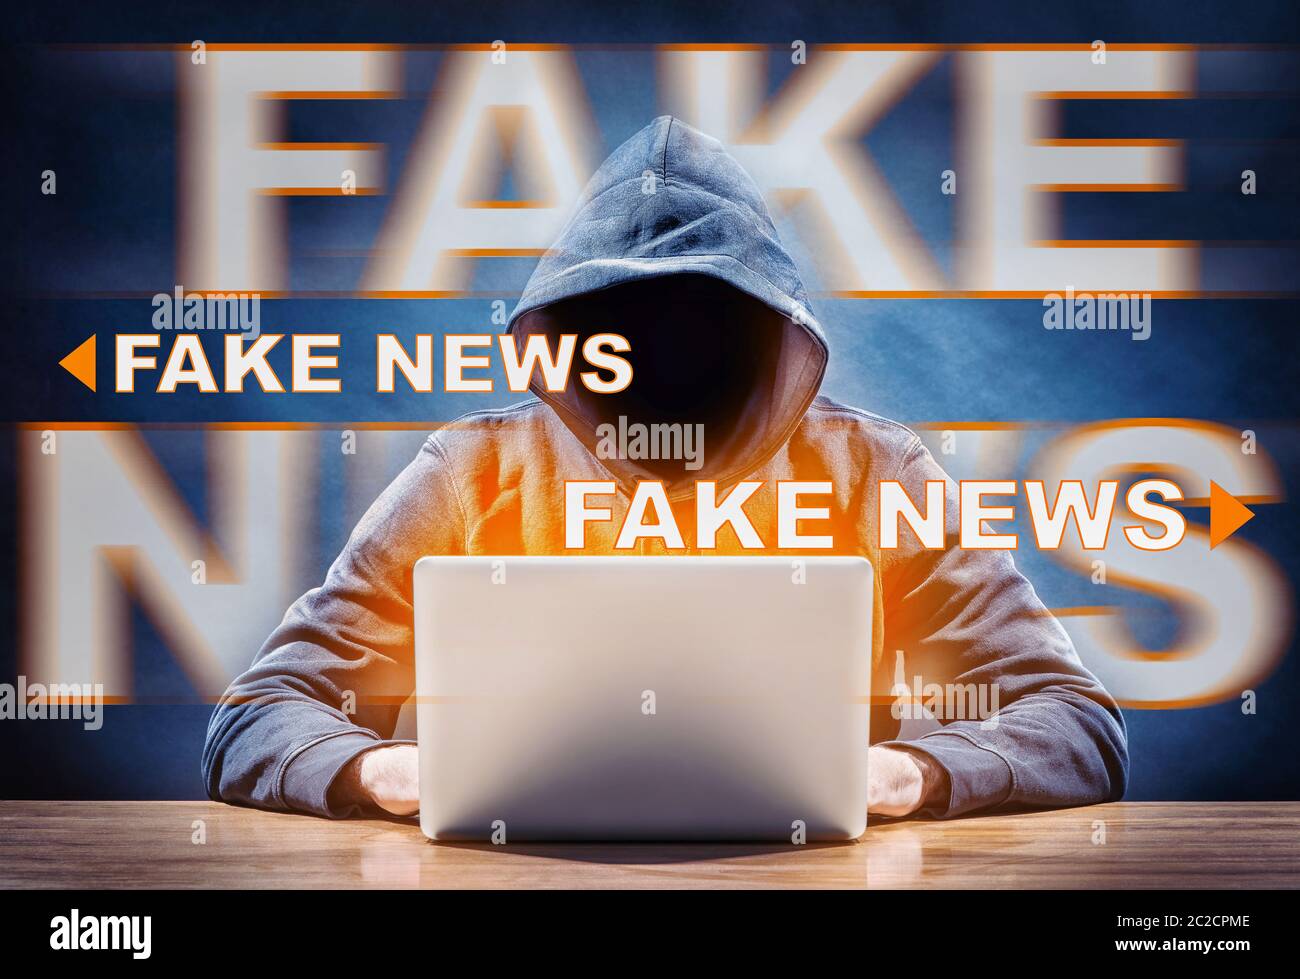 a hacker spreading fake news from a computer Stock Photo